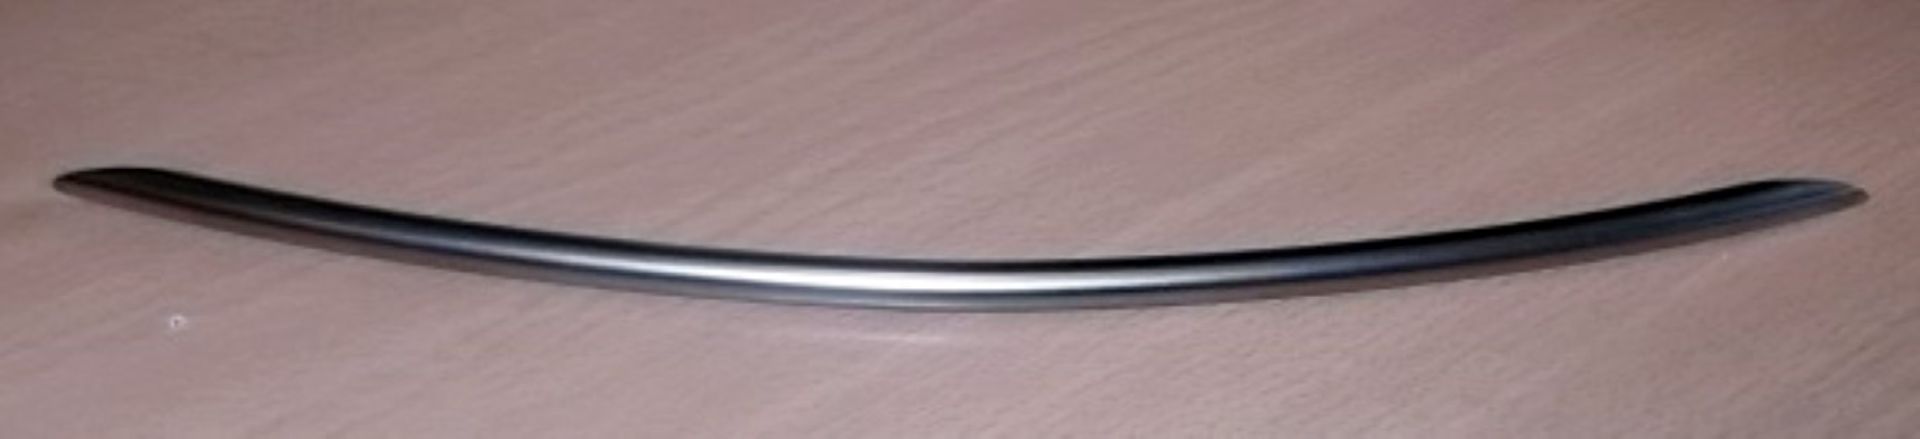 400 x BOW Handle Kitchen Door Handles By Crestwood - 320mm - New Stock - Brushed Nickel Finish - - Image 3 of 11